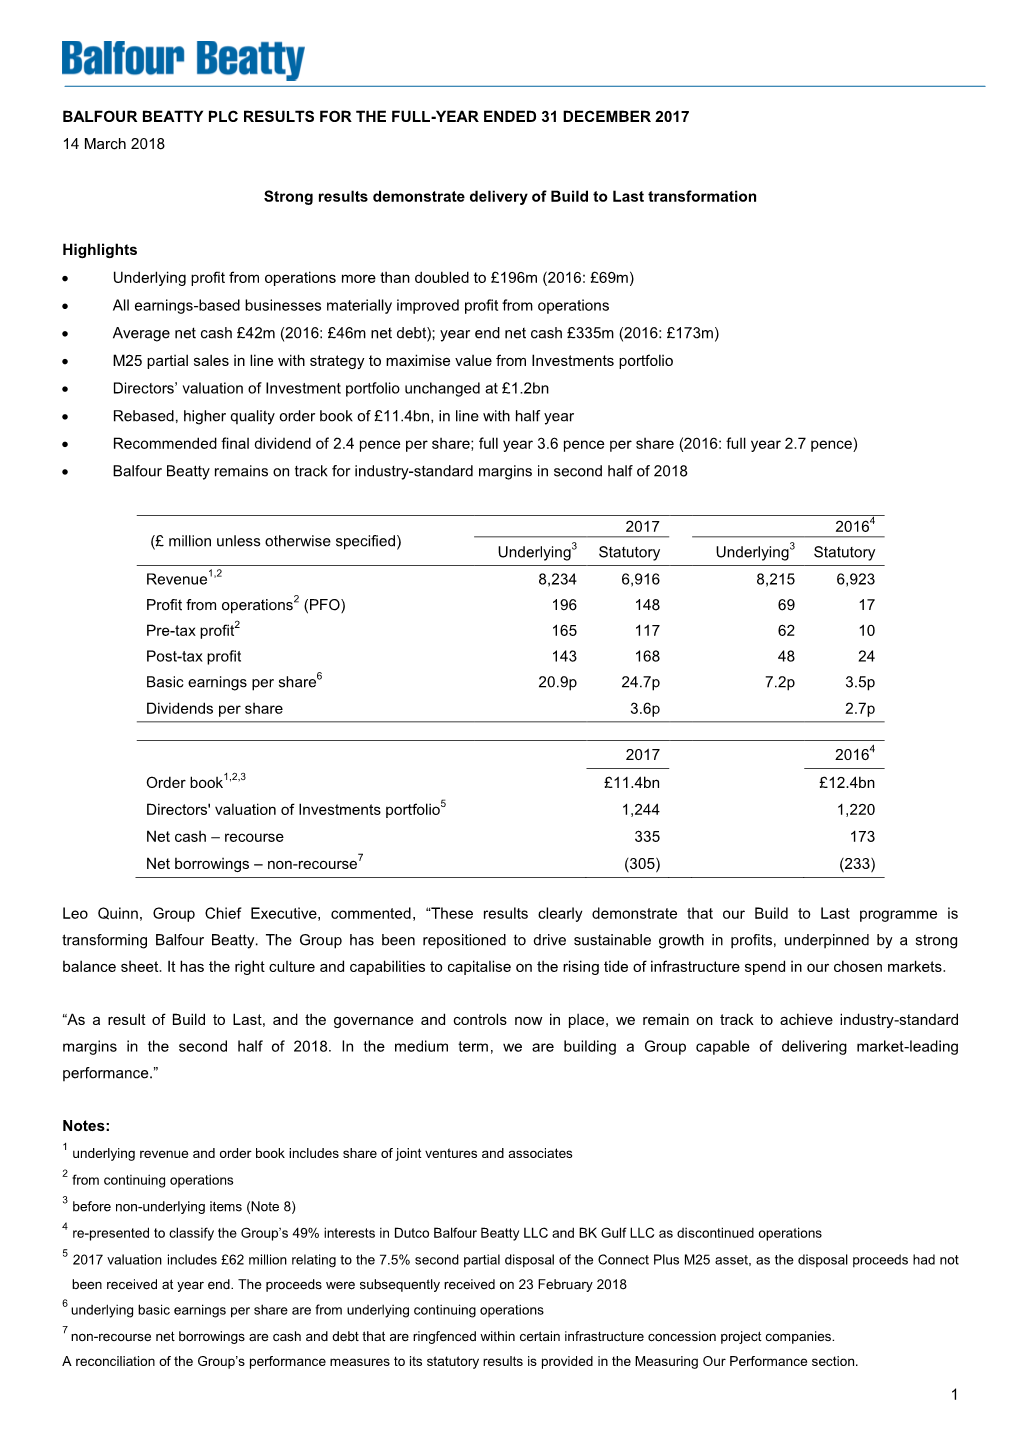 1 Balfour Beatty Plc Results for the Full-Year Ended 31